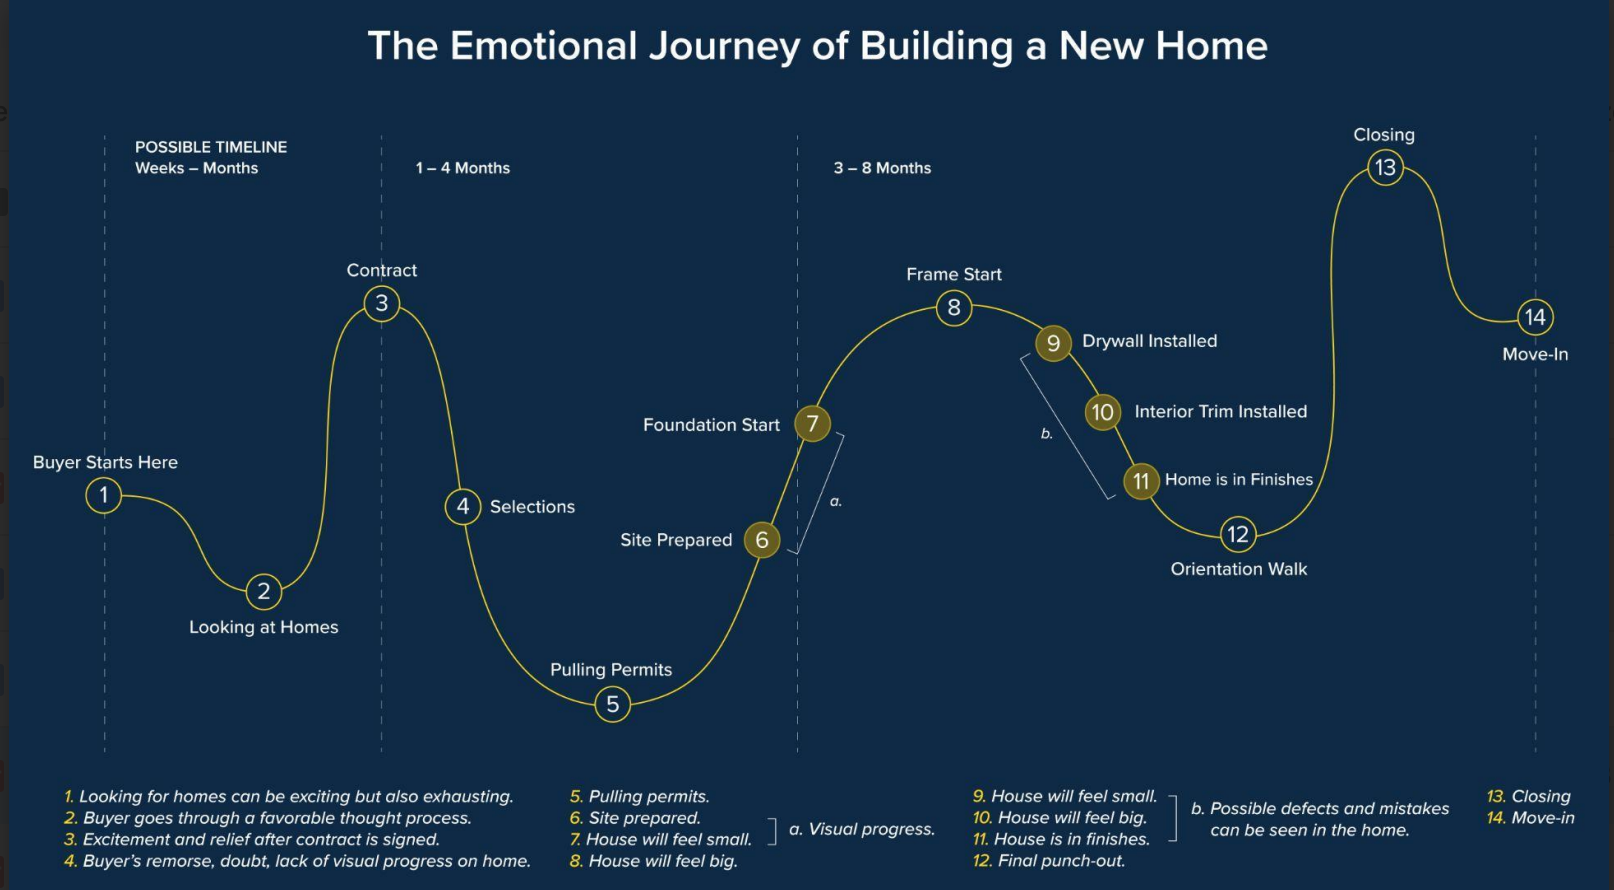 A graph showing the emotional journey of building a new home.